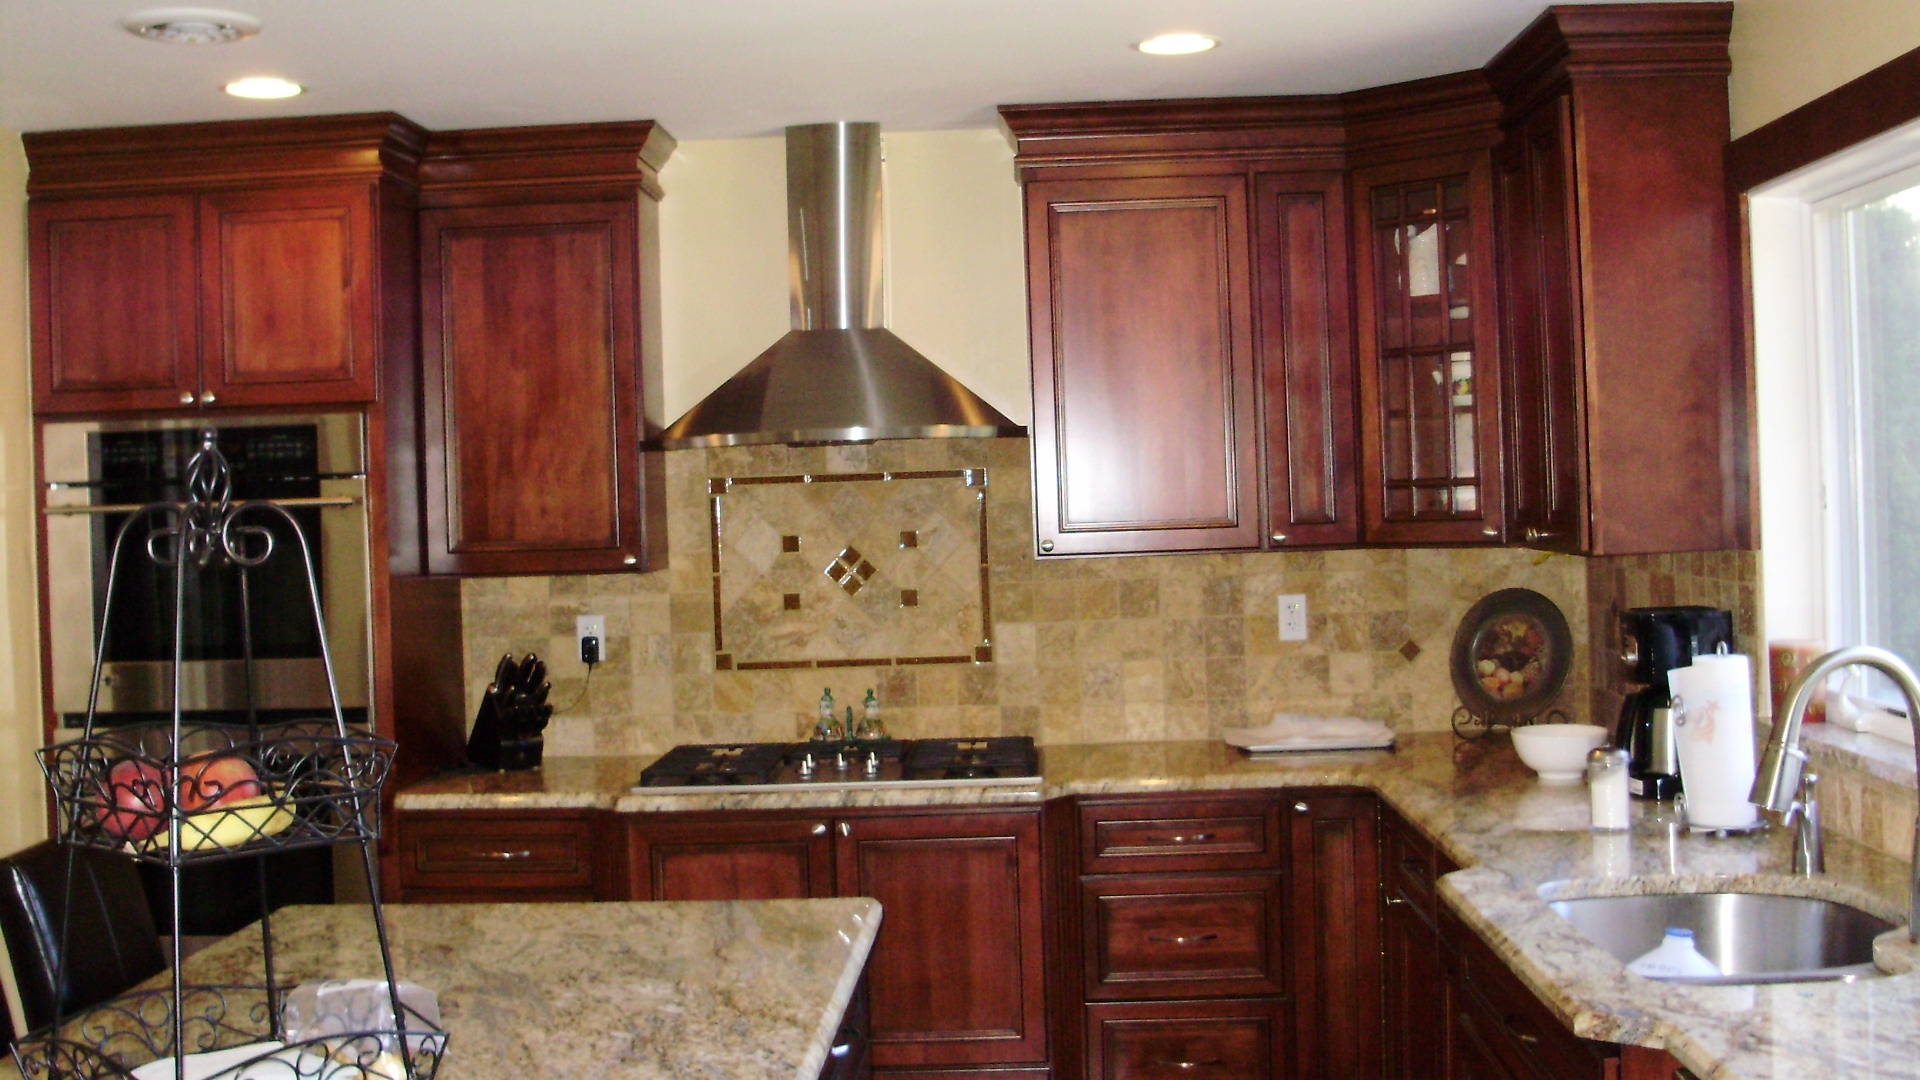 another happy kitchen customer-October 31 2008